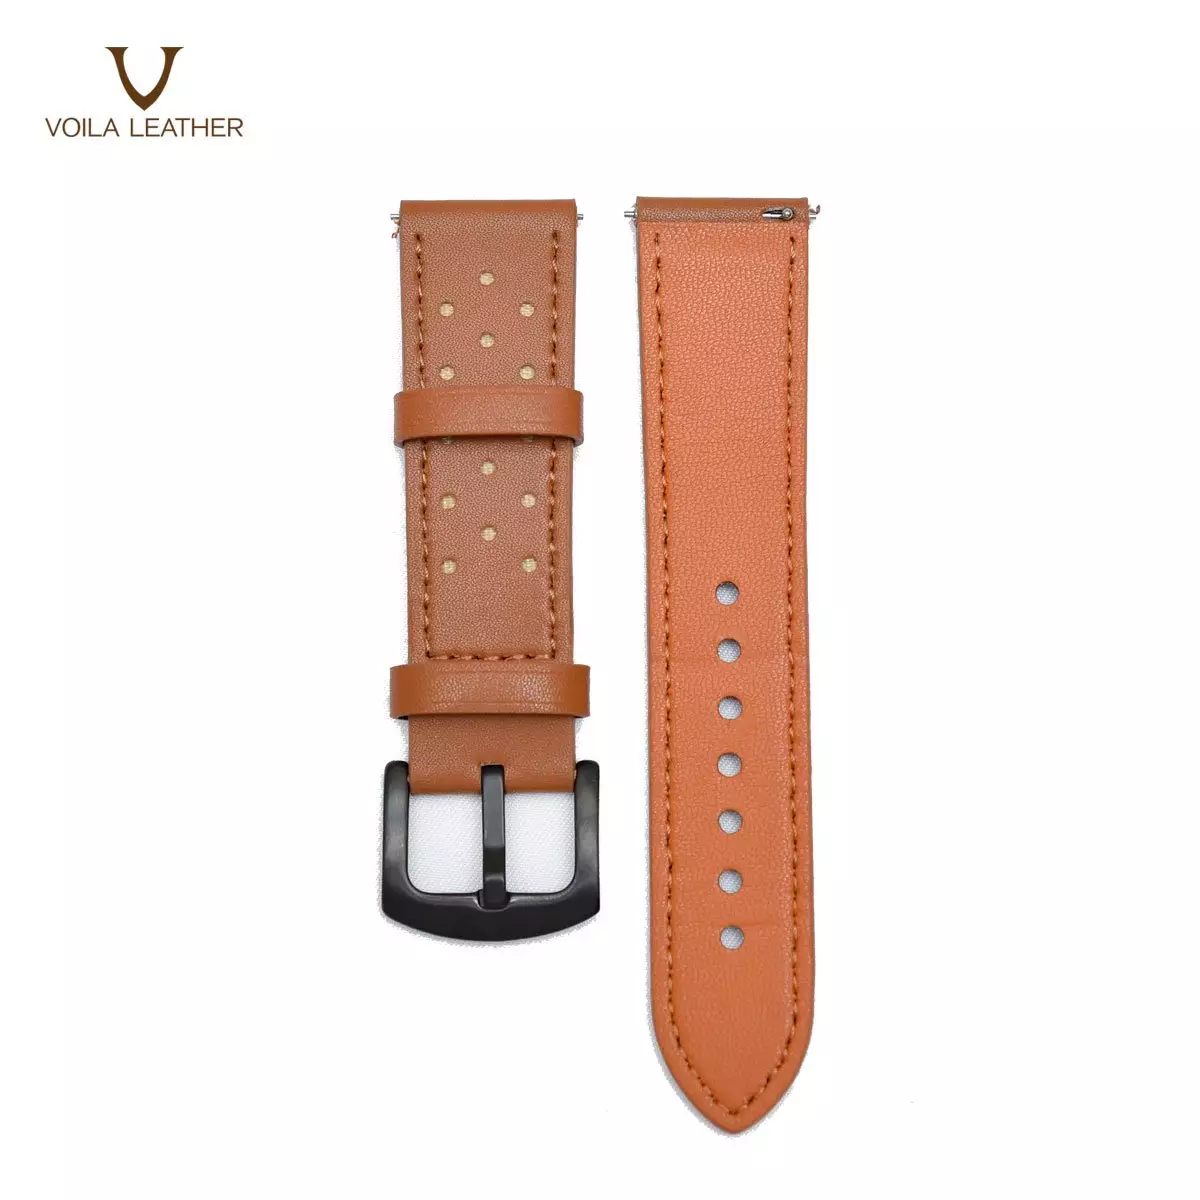 22mm Light Brown Leather and Rubber Watch Strap - S221300 - Fossil